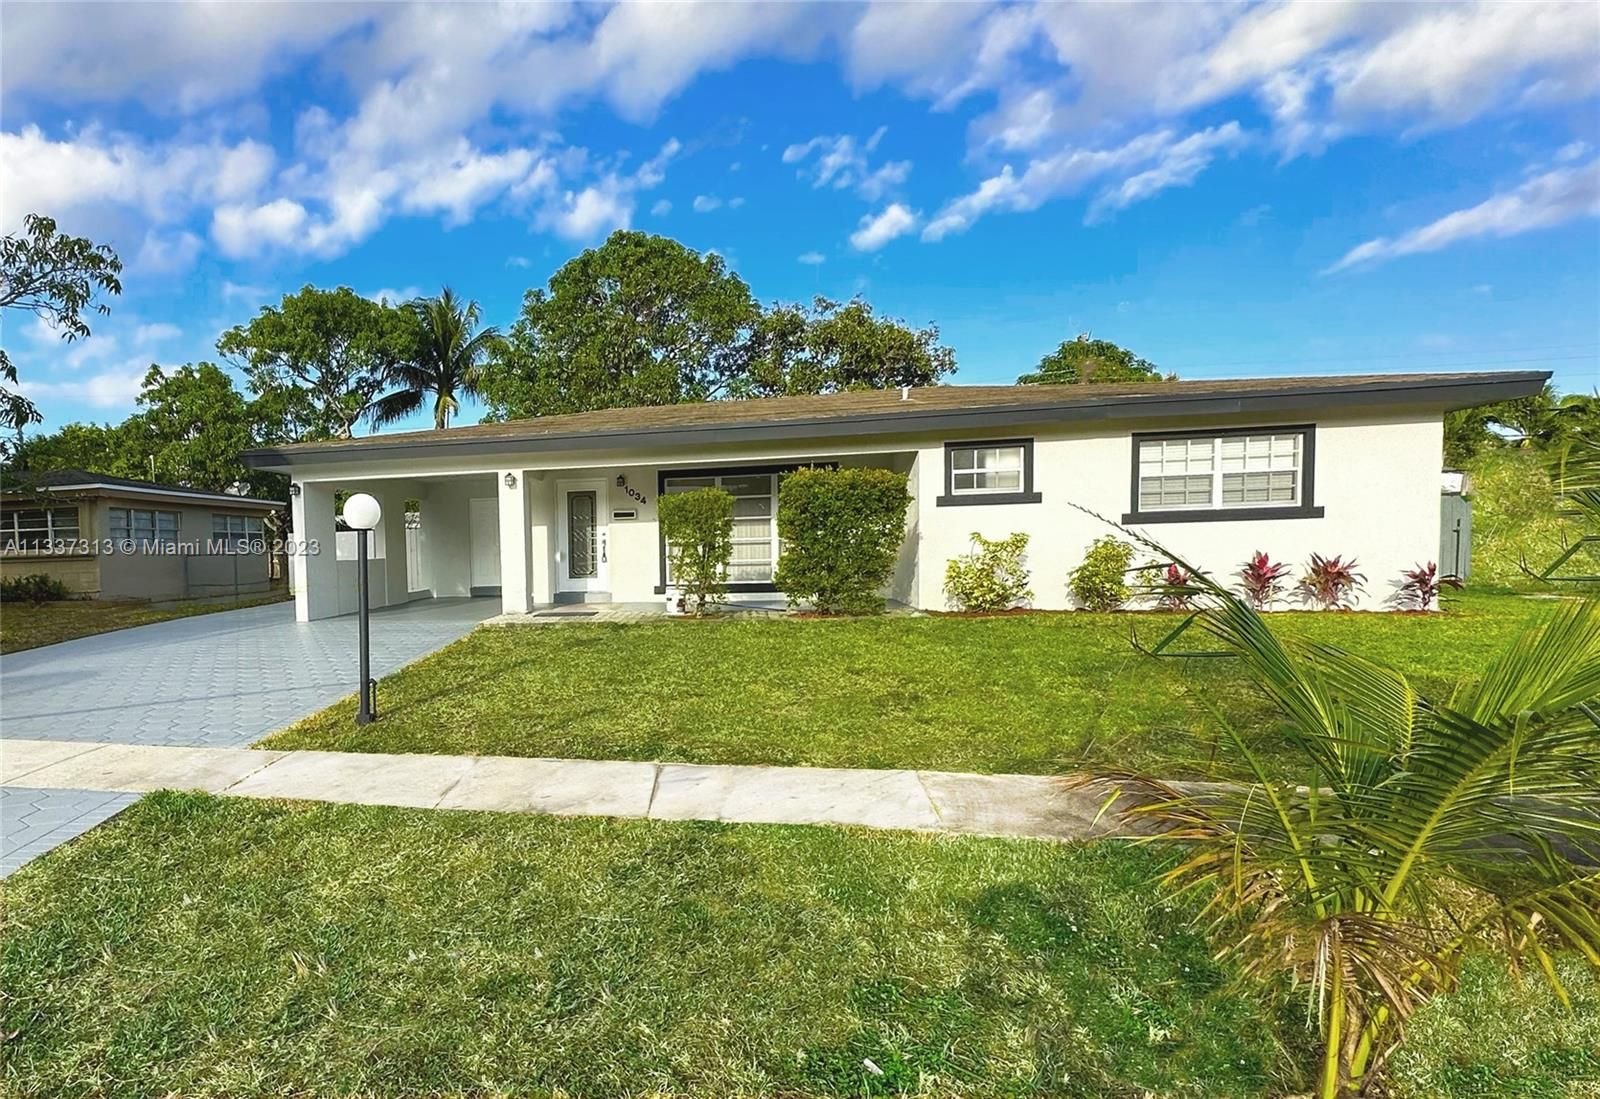 Real estate property located at 1034 Long Island Ave, Broward County, Fort Lauderdale, FL